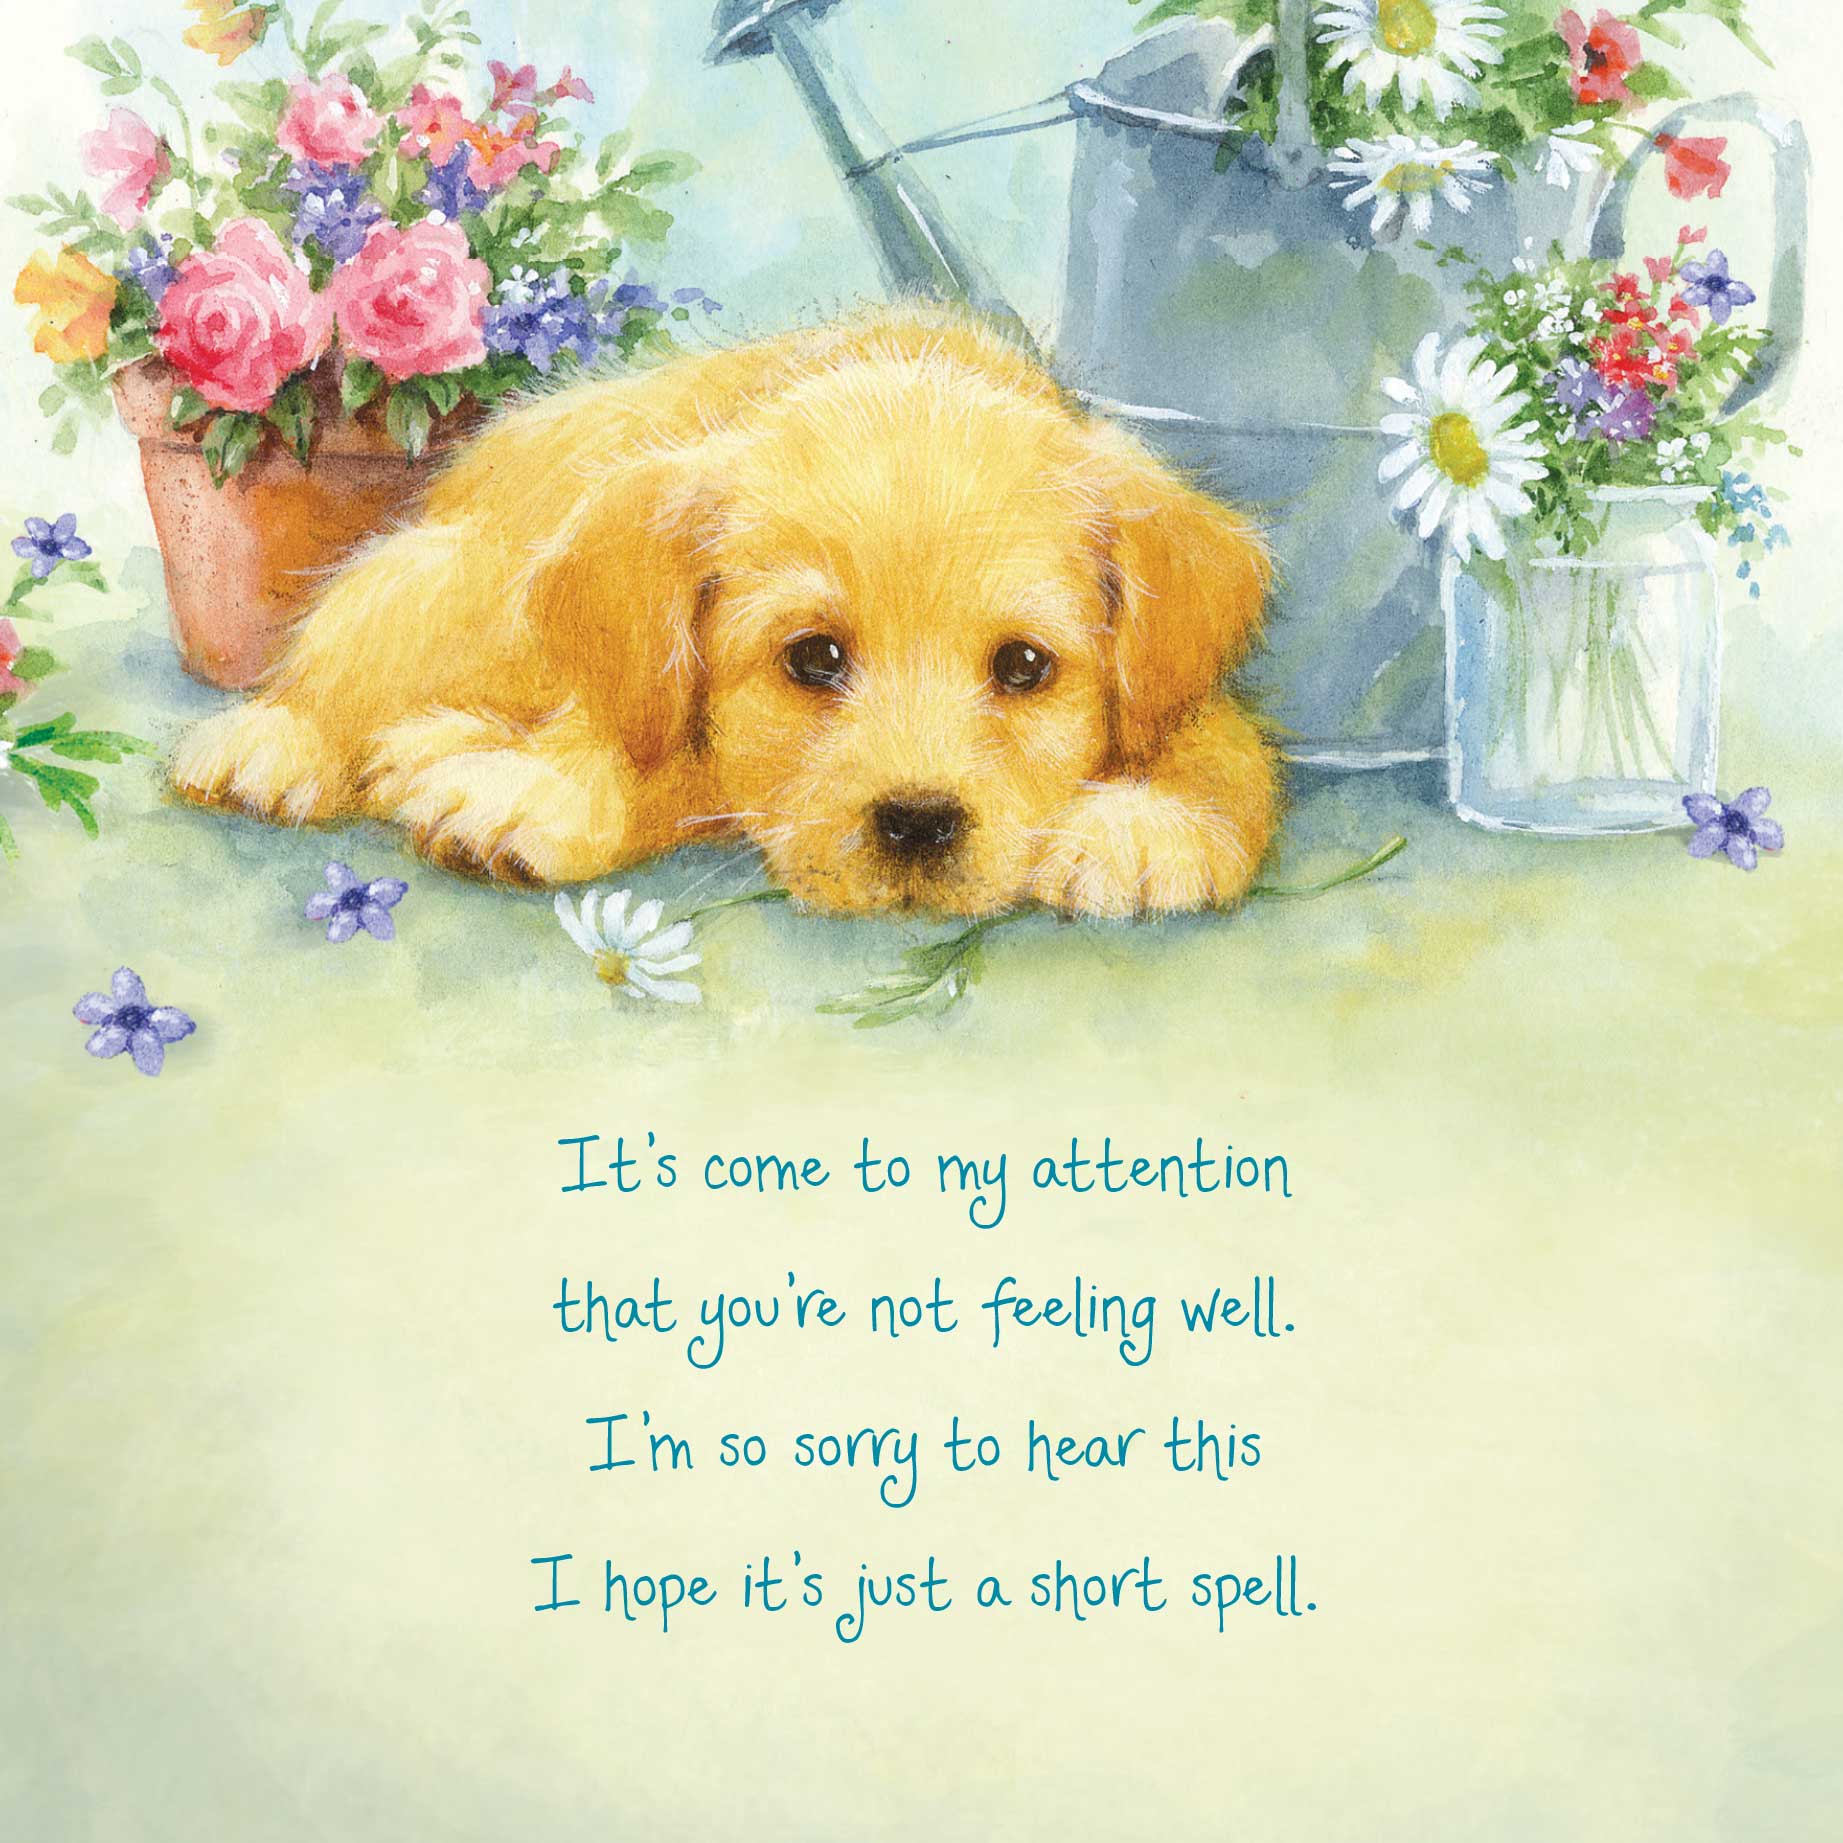 Collection 97+ Images pictures of get well cards Full HD, 2k, 4k